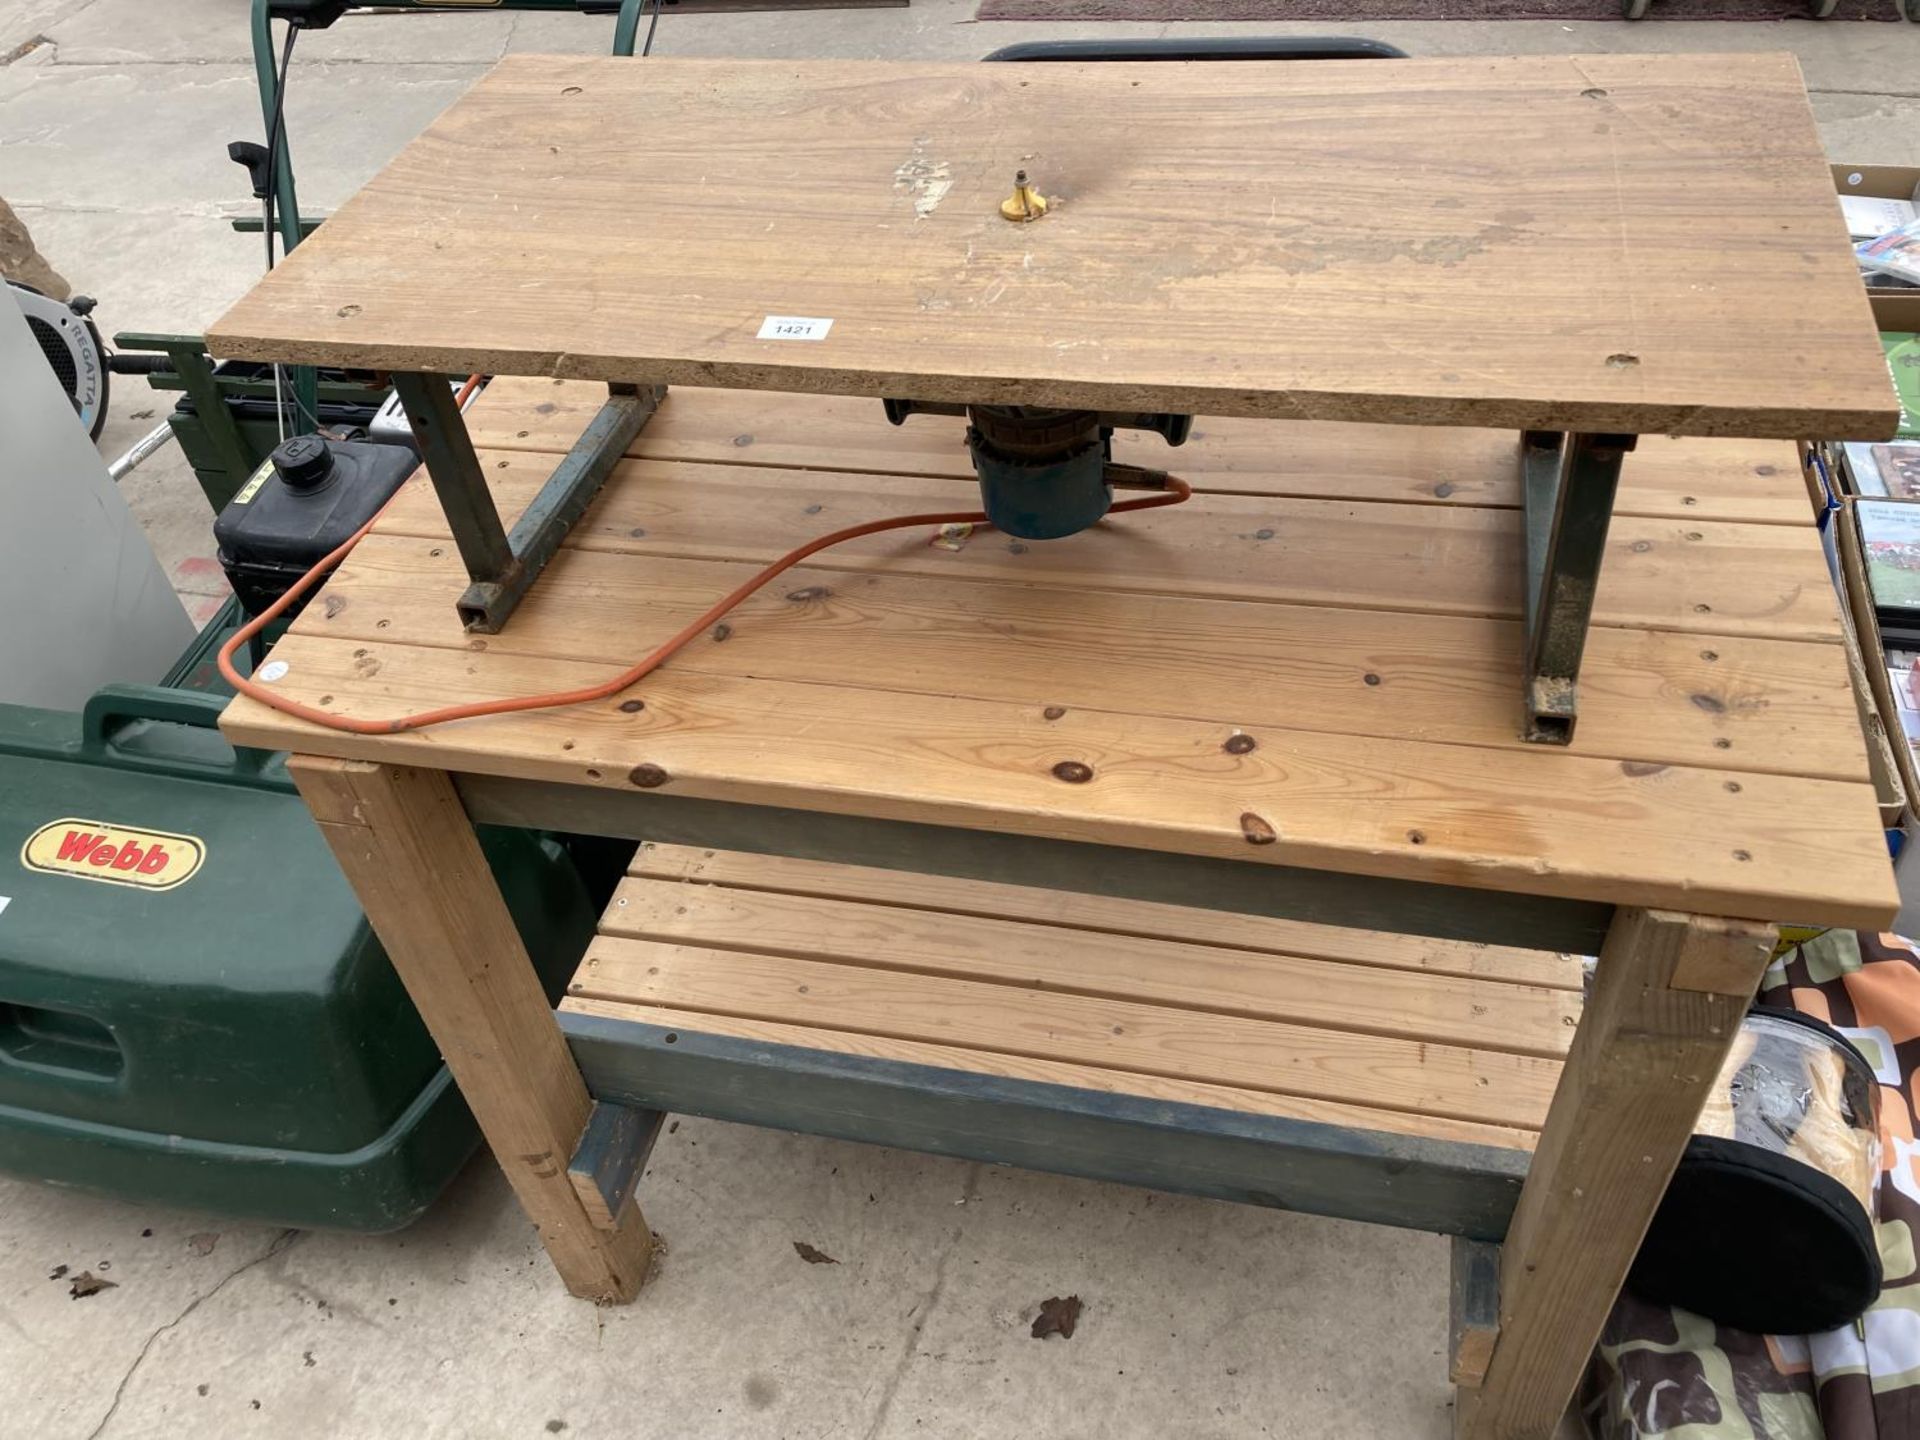 A WOODEN WORK BENCH AND A ROUTER TABLE COMPLETE WITH ROUTER